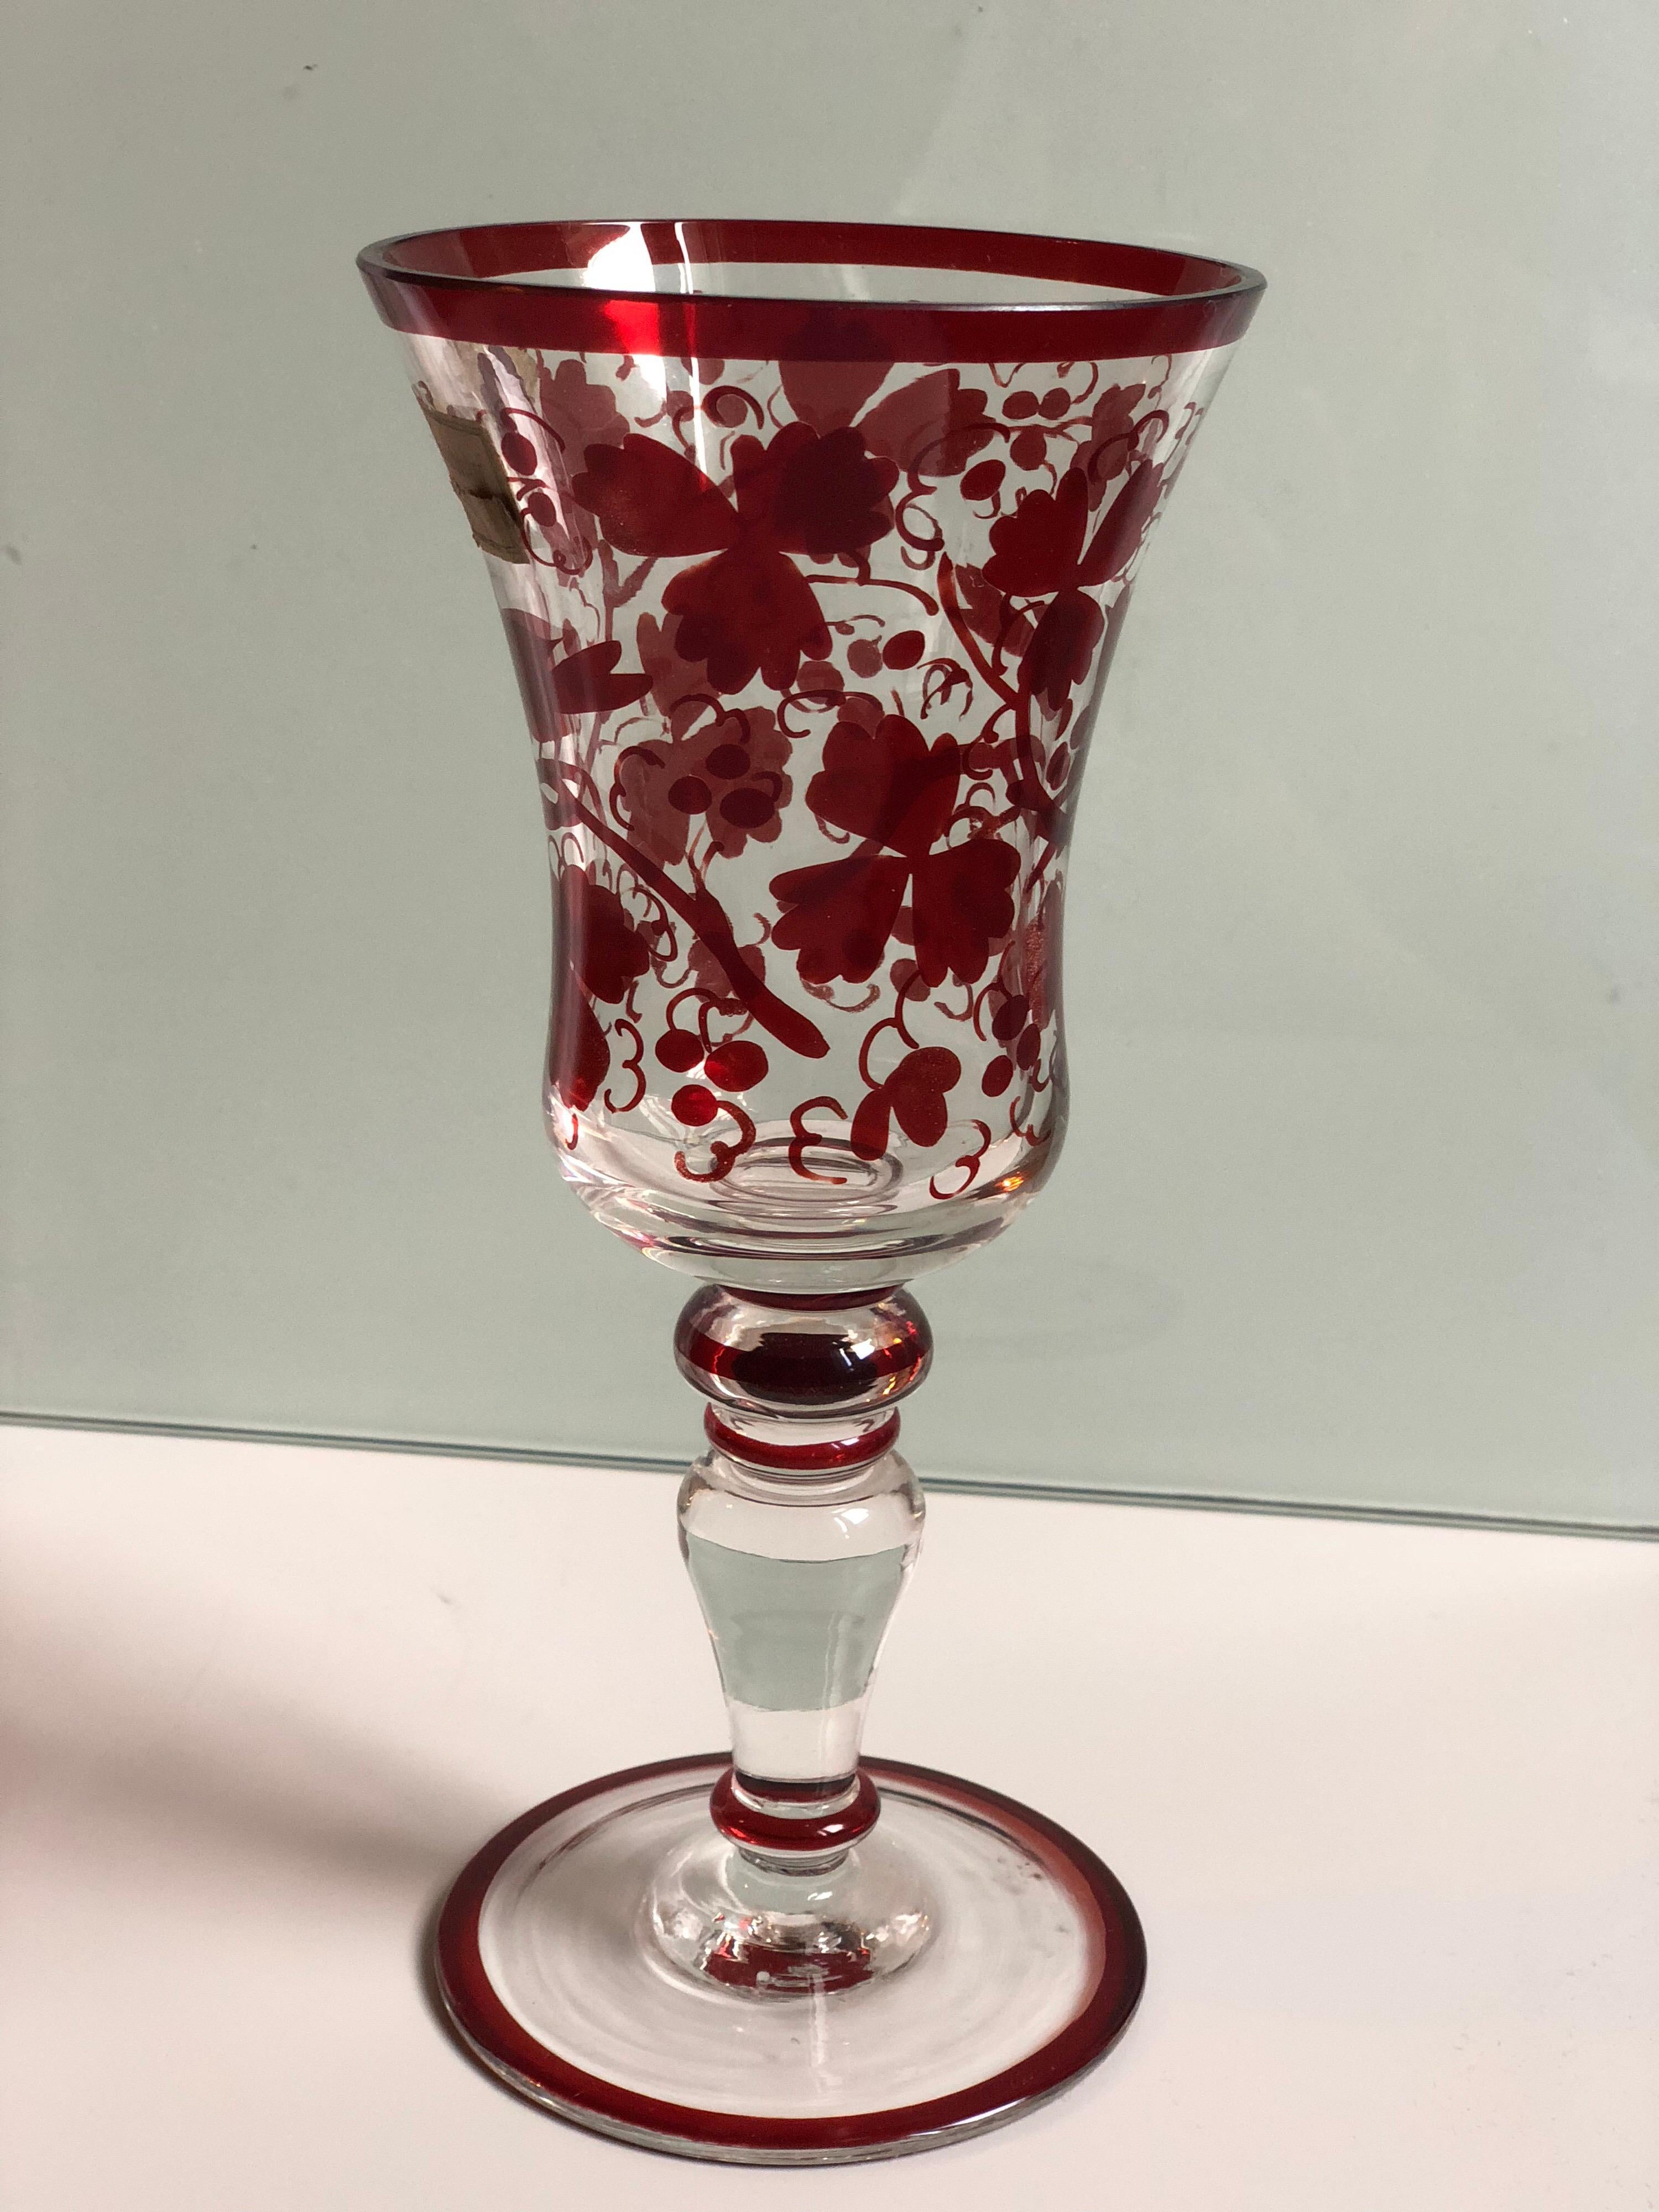 The Egermann Company, dating back to the early 1800s, specializes in hand decorated glass with each piece posing a decorative and highly art oriented character. Egermann’s main claim to fame is its invention in 1832 of a process called “red